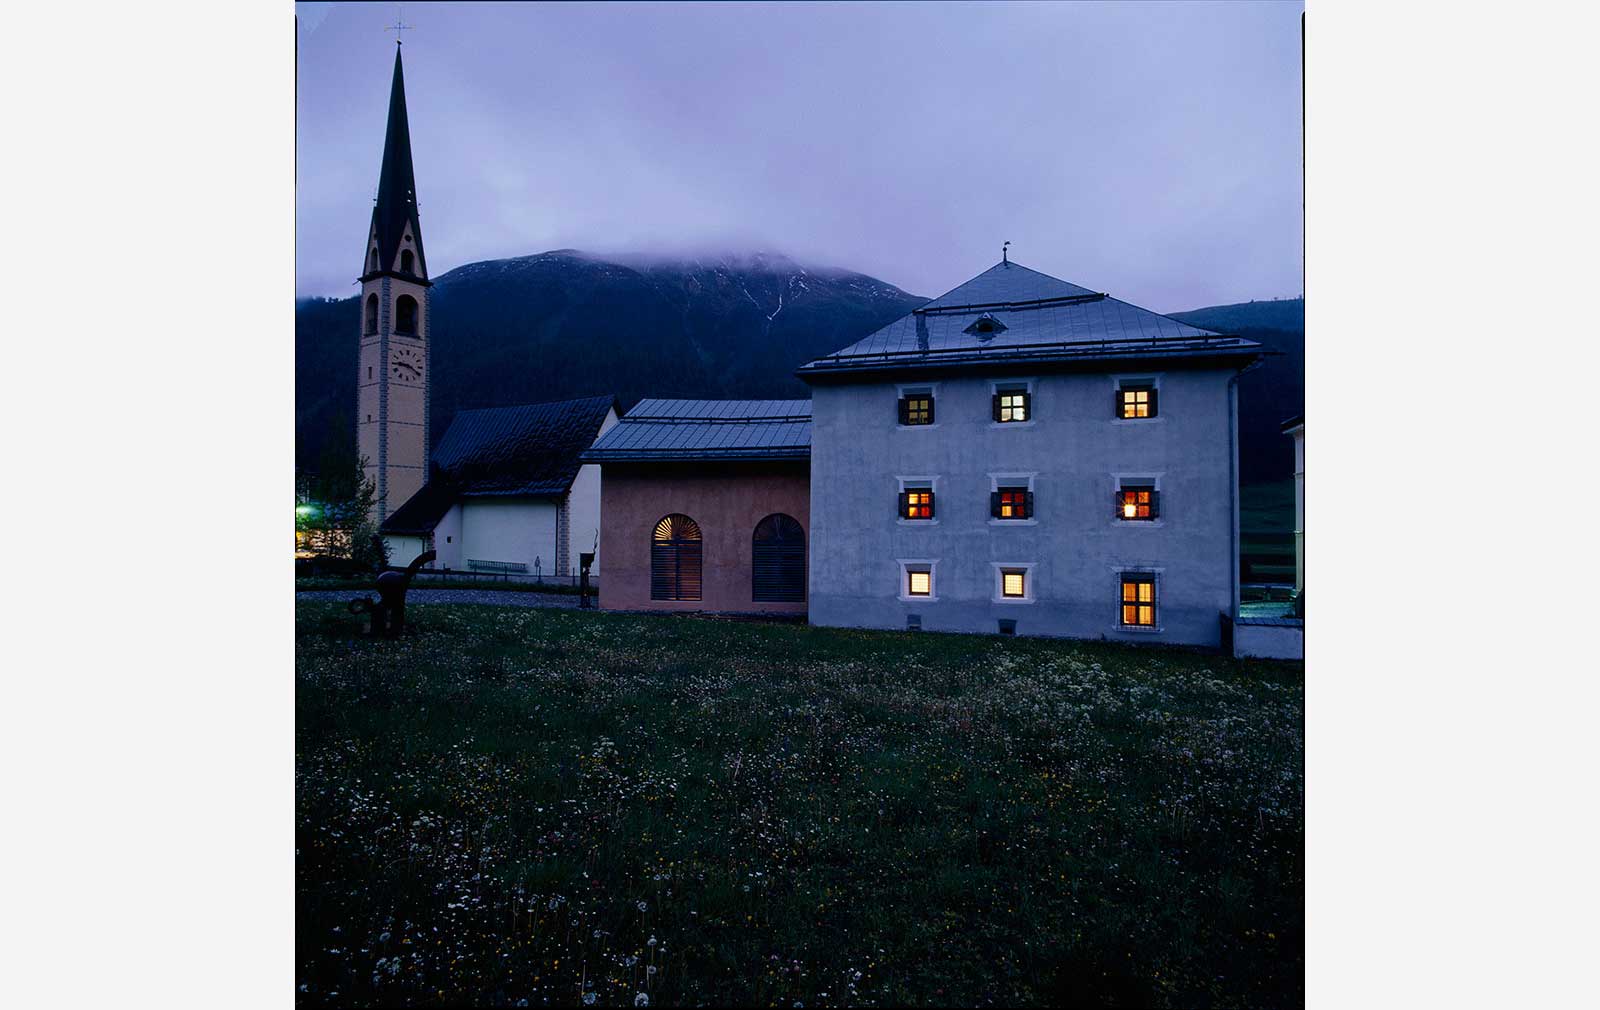 Von Bartha gallery features in our guide to art in the Alps